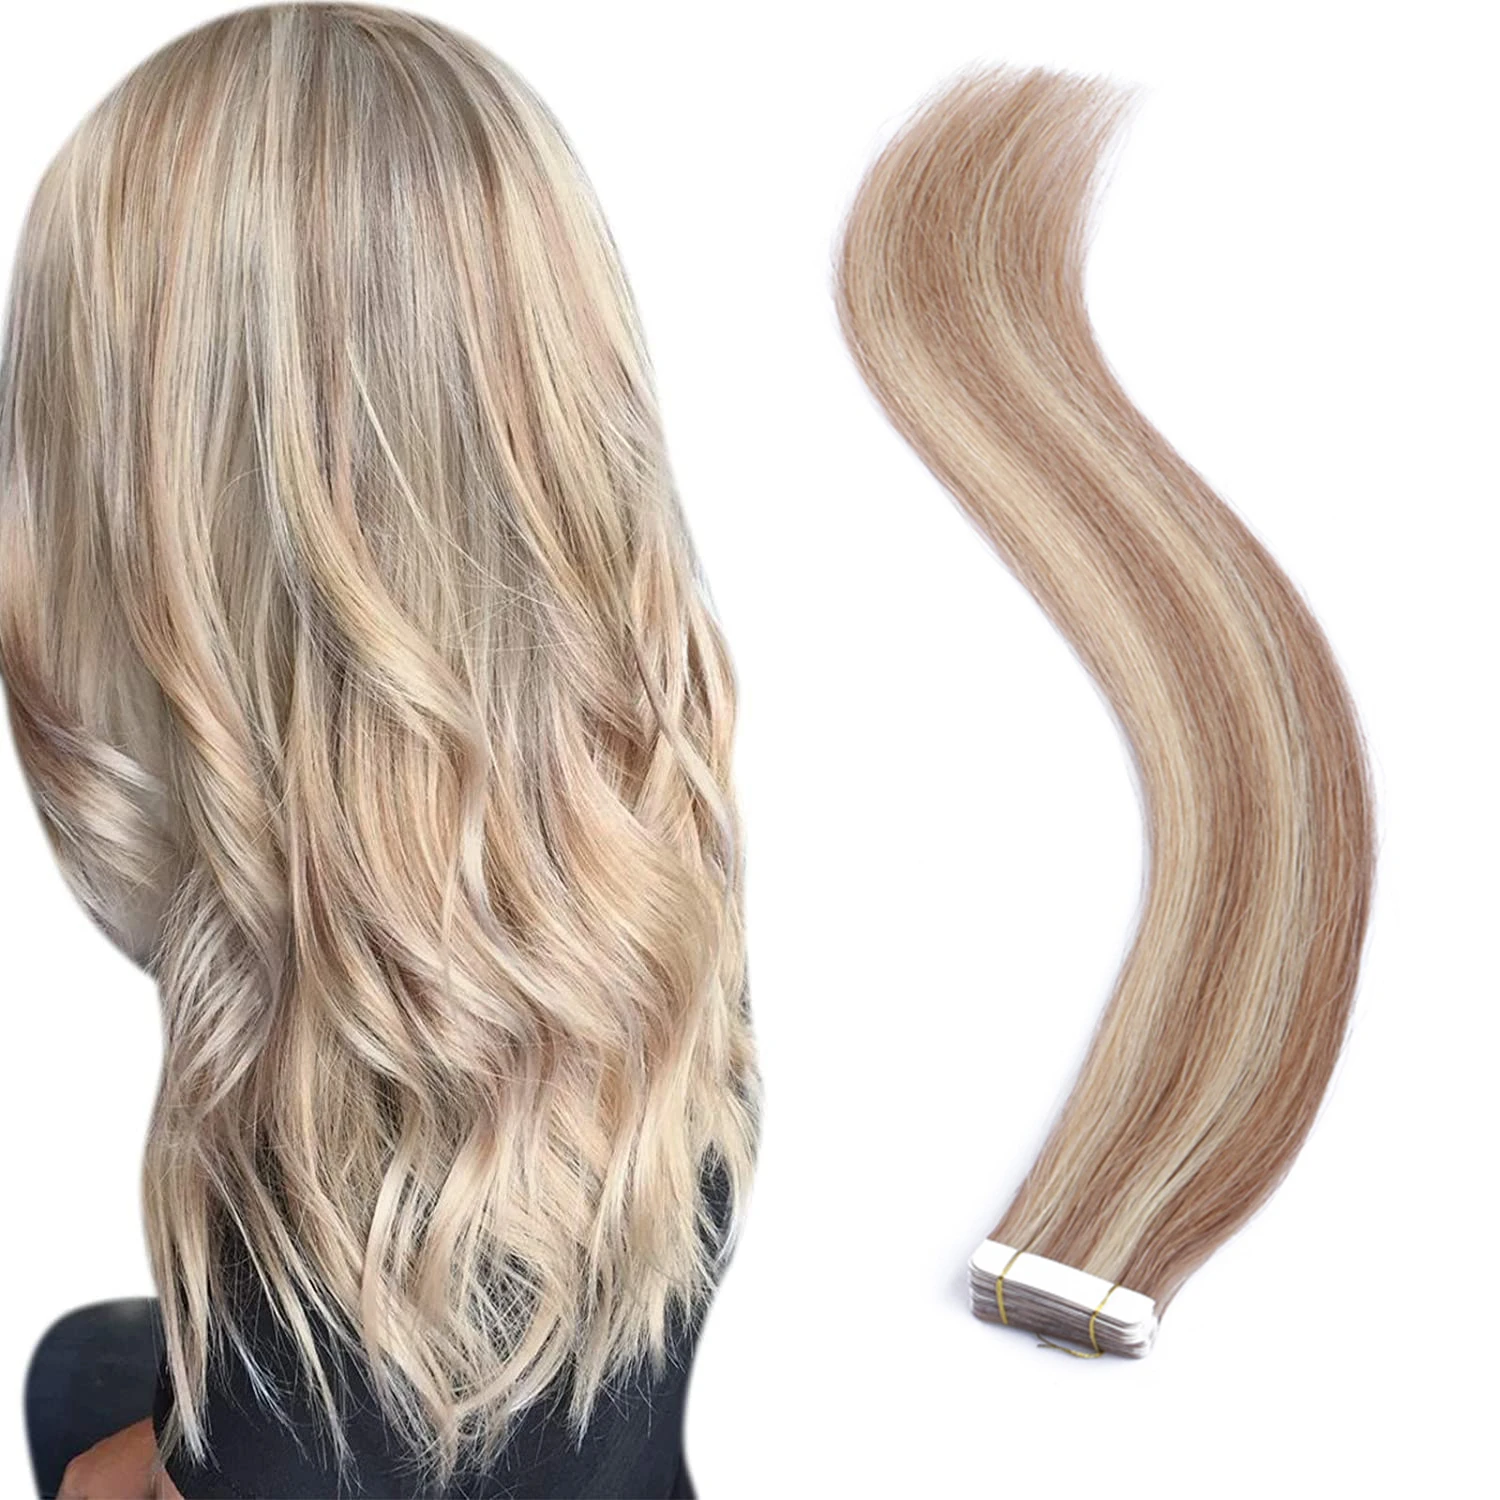 Blonde Hair Extensions Tape Highlighted Tape Hair Extensions Human Hair  Silky Straight Double Sided Tape In Extensions - Tape Hair Extensions -  AliExpress